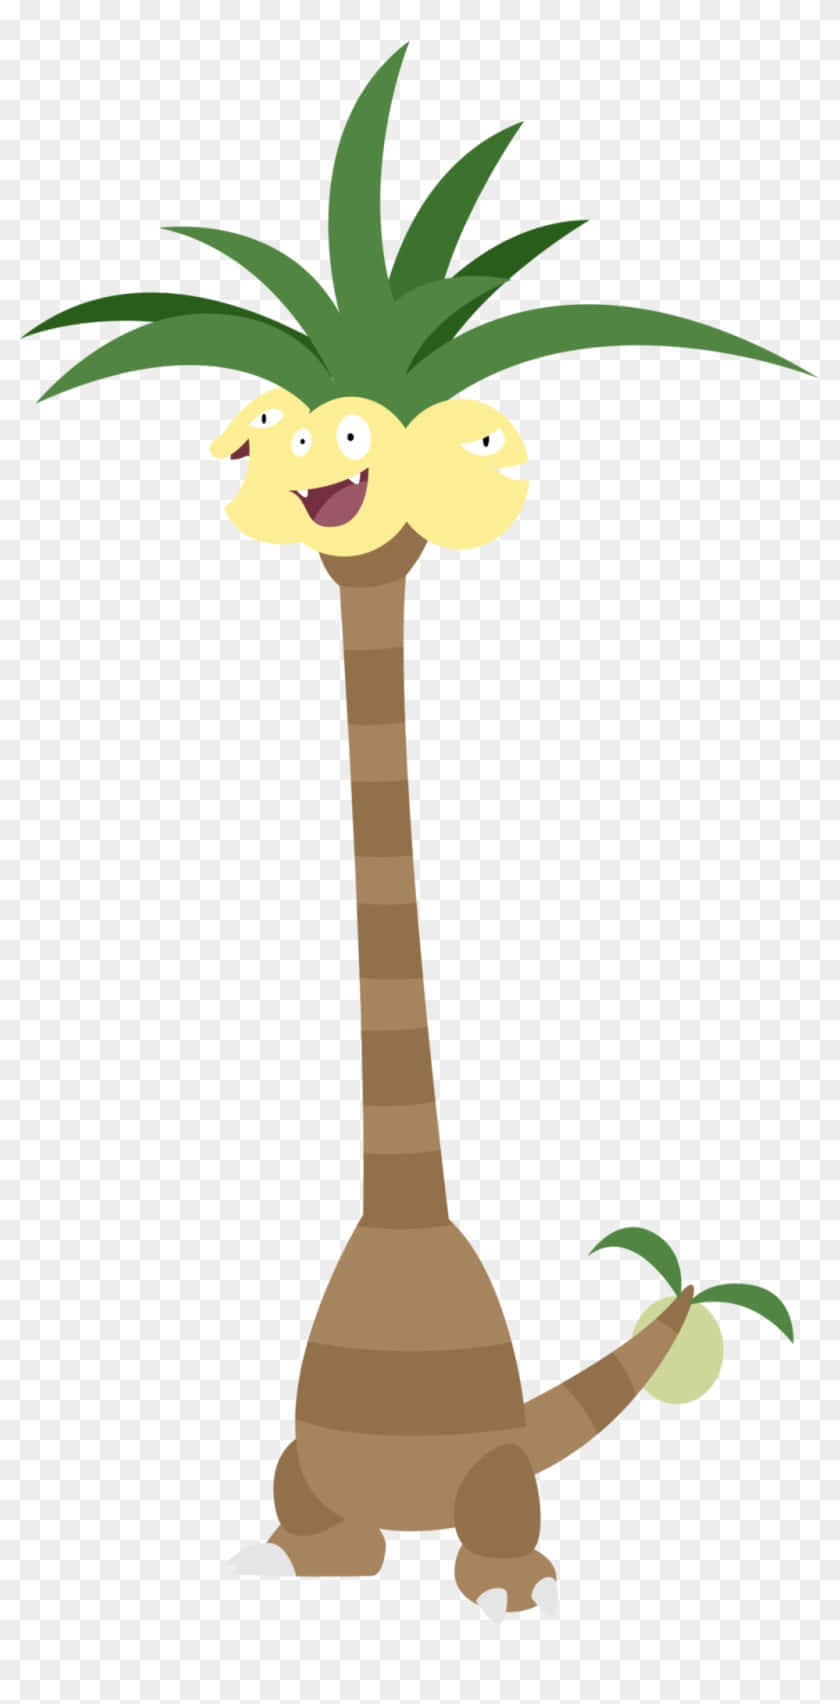 Exeggutor Without Outline Wallpaper